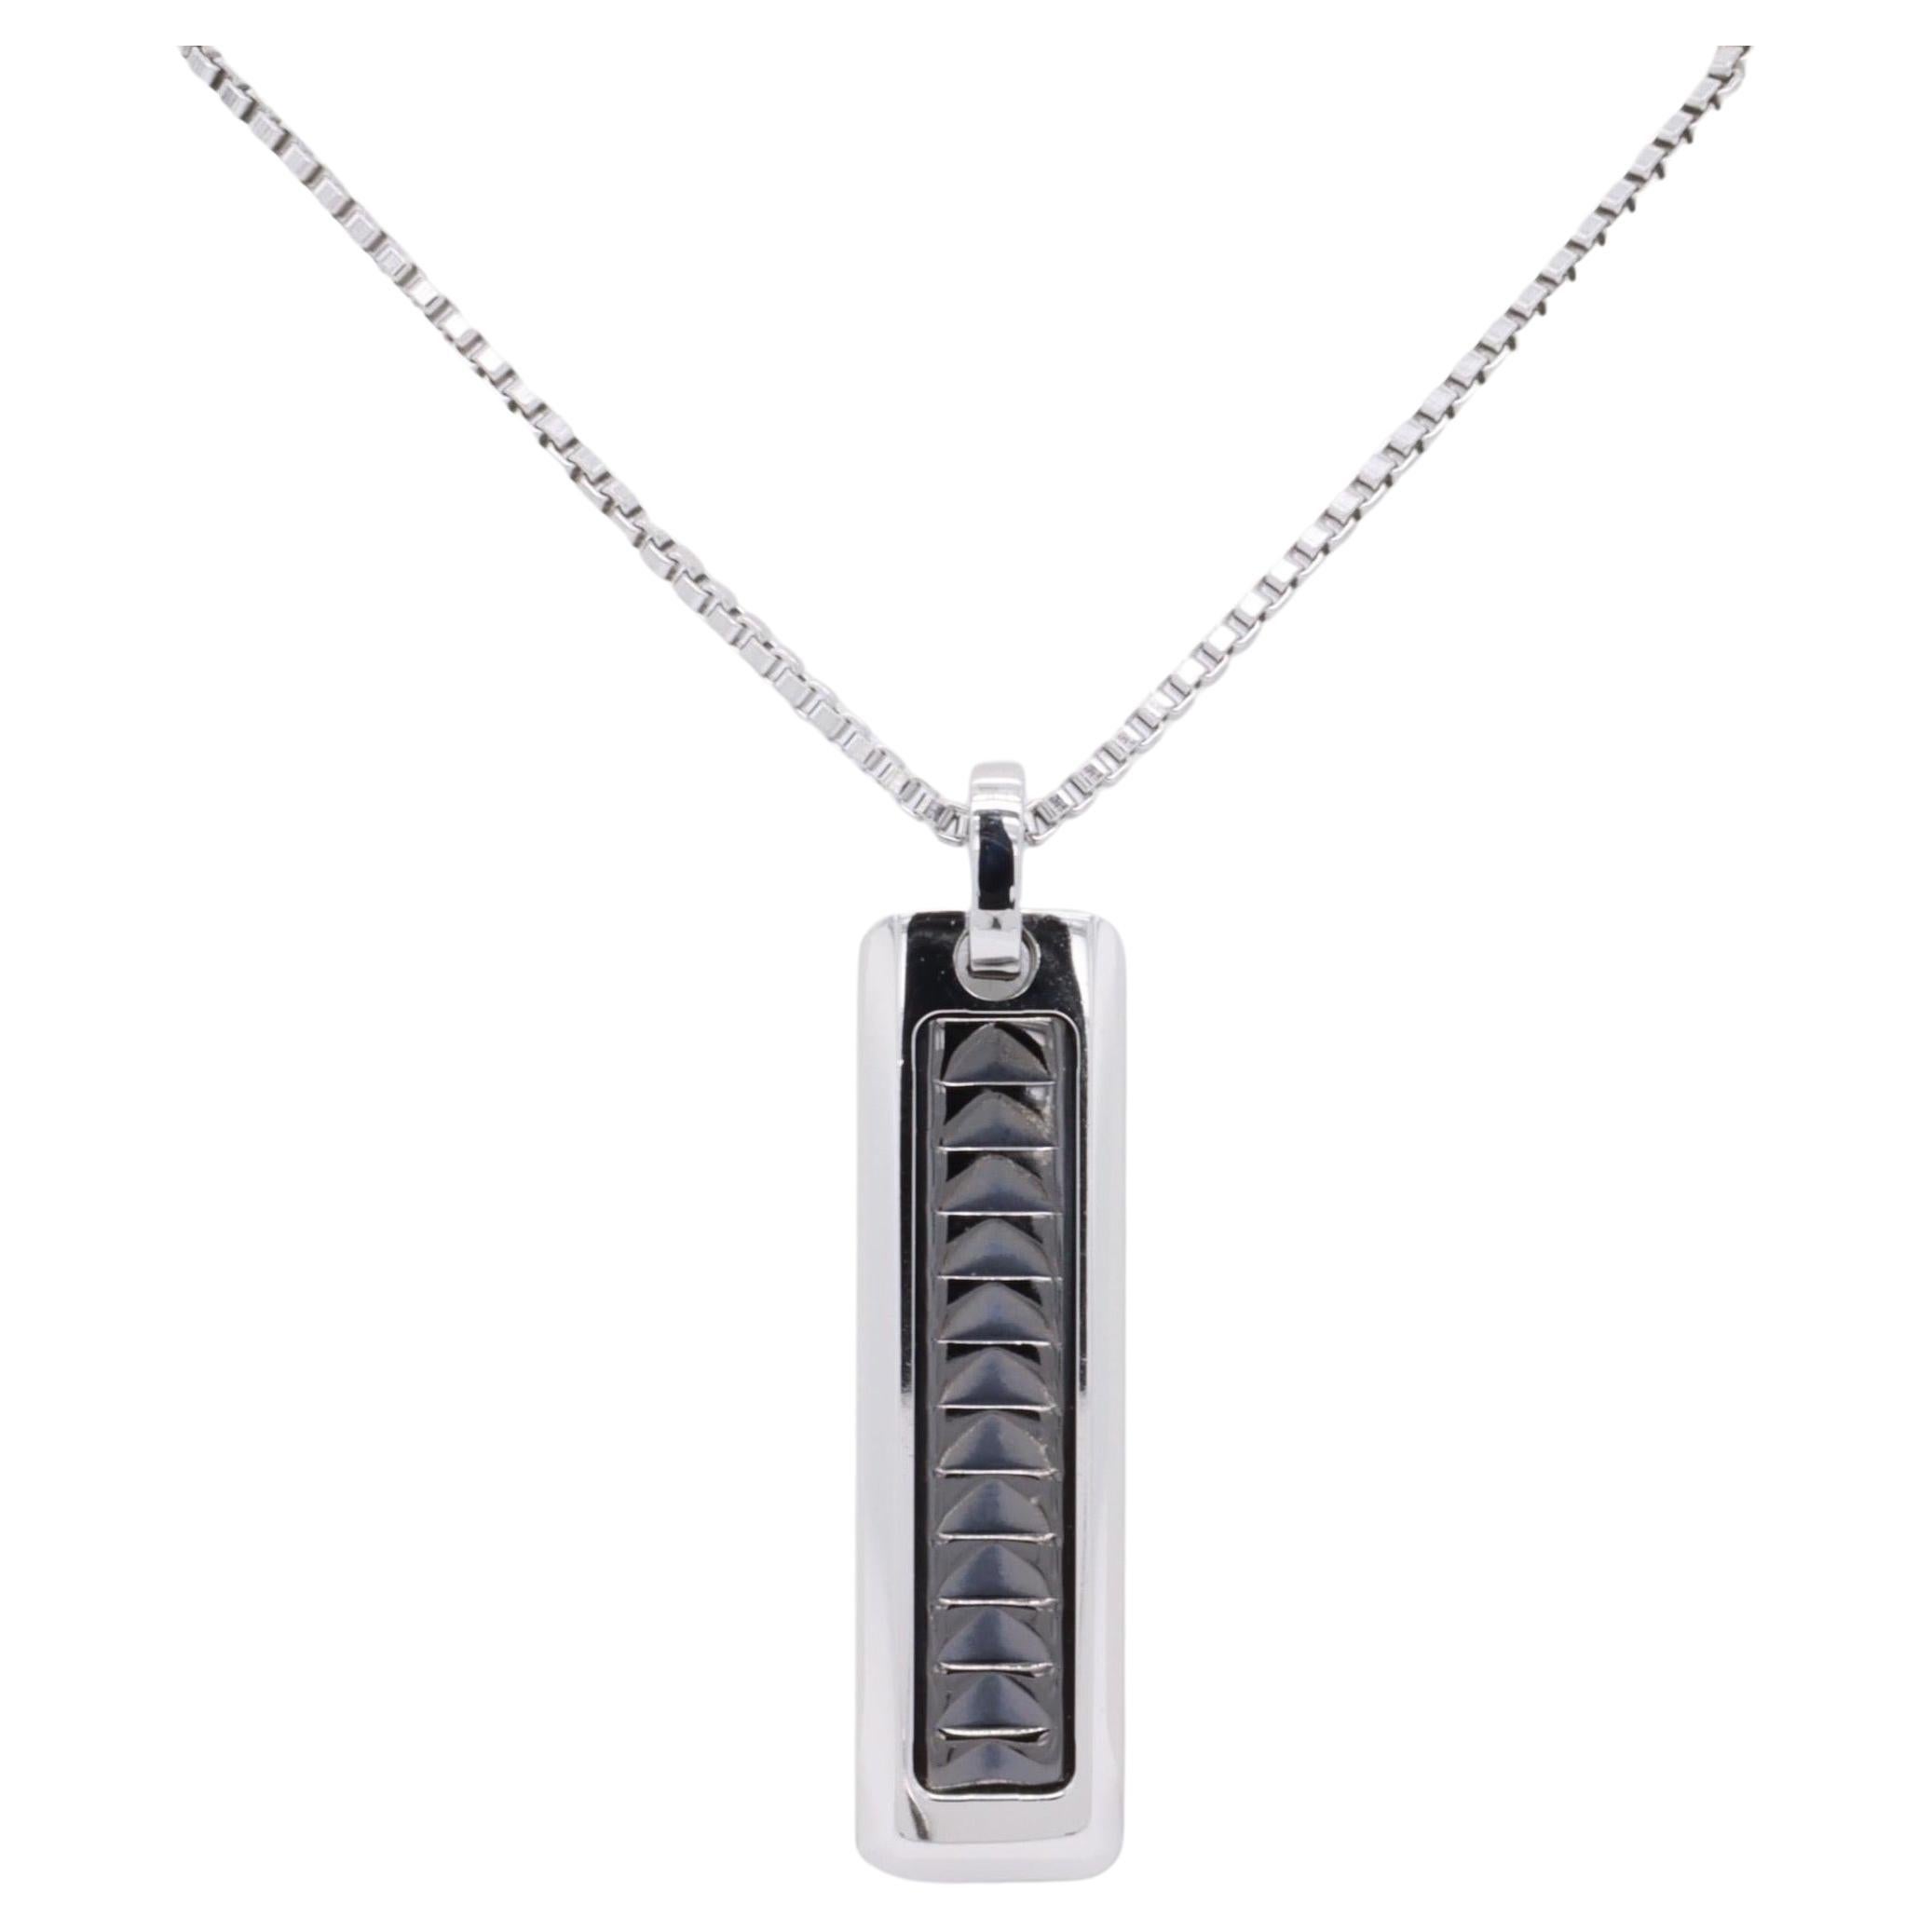 Tiffany & Co. Stainless Steel Paloma's Caliper Men's Pendant Necklace